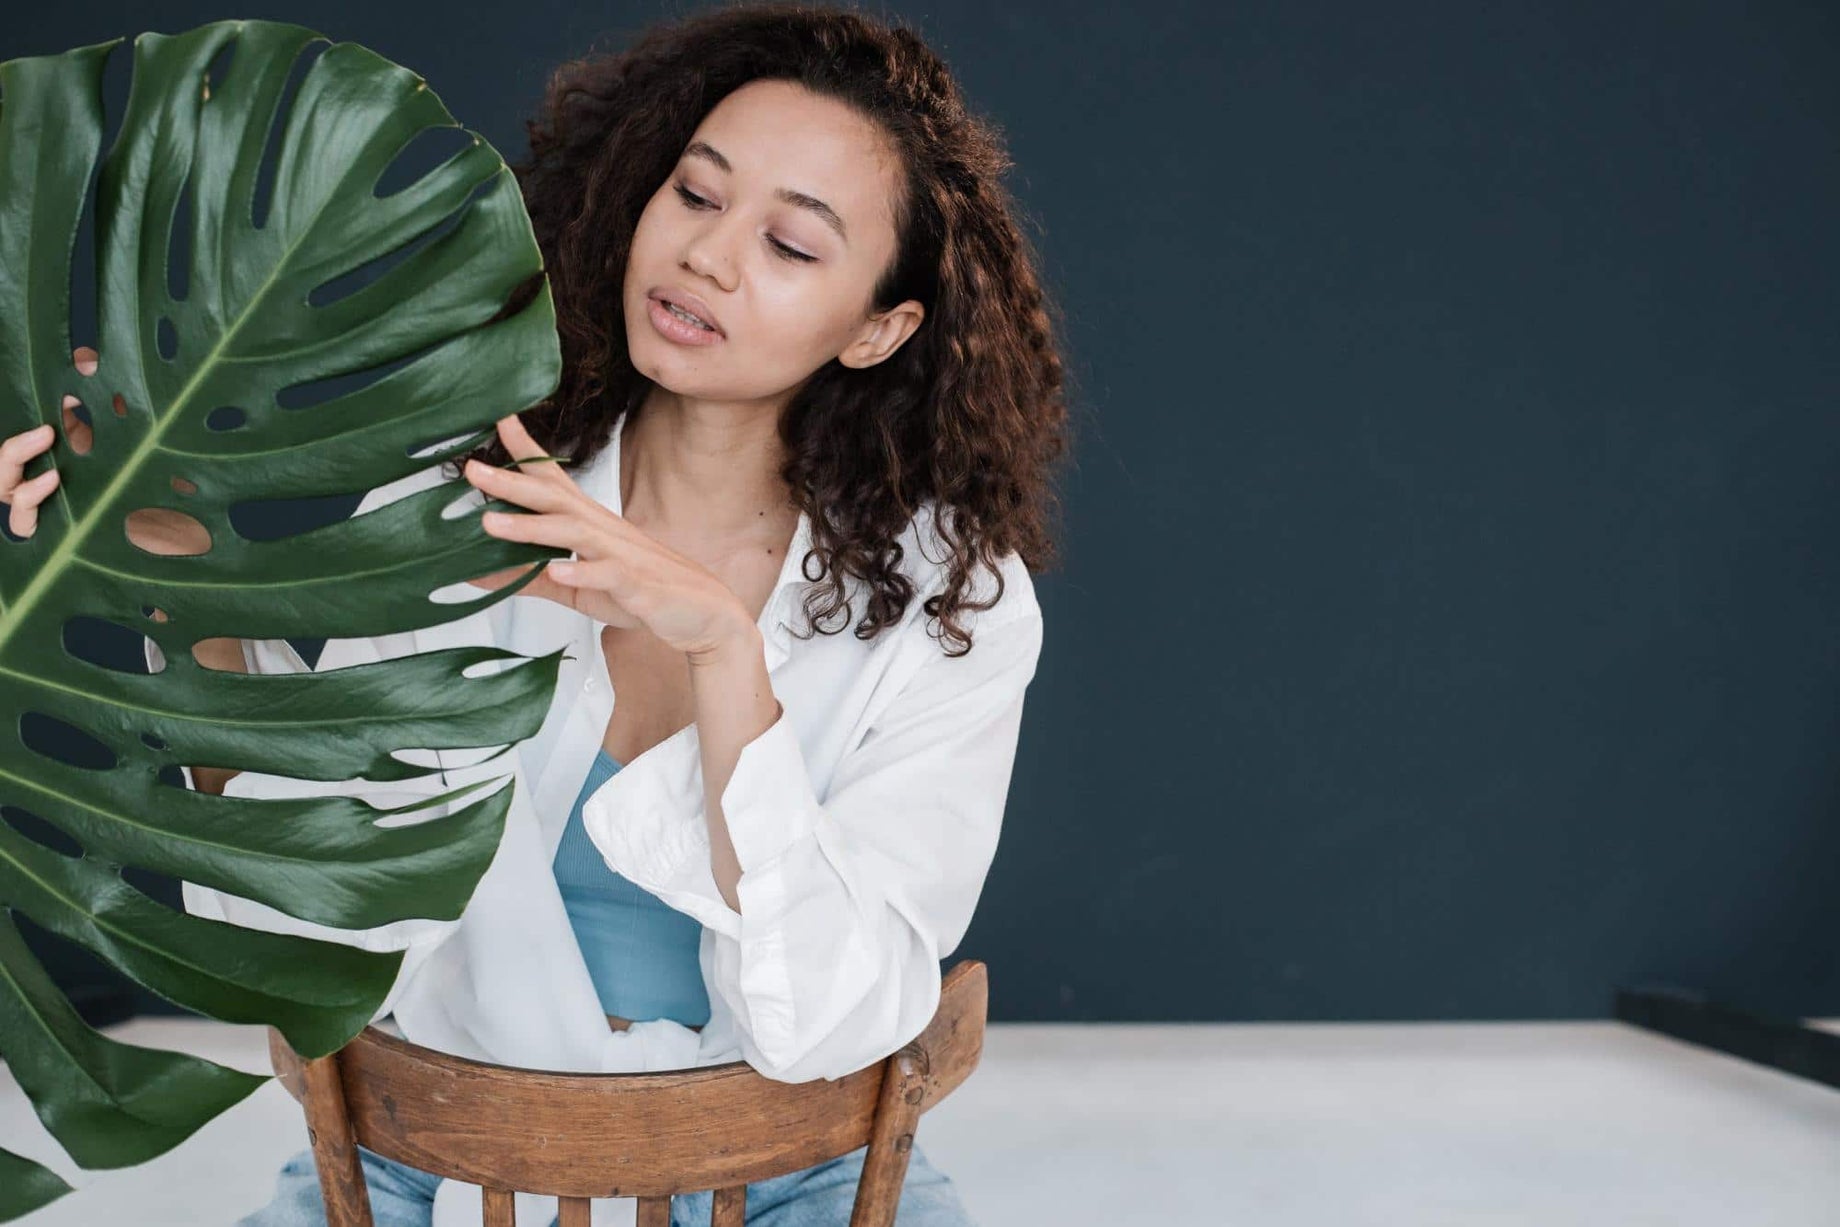 Photo of a healthy young woman sitting In a chair touching a plant. Taking prebiotics can help support the good bacteria in your gut and reinforce overall health.